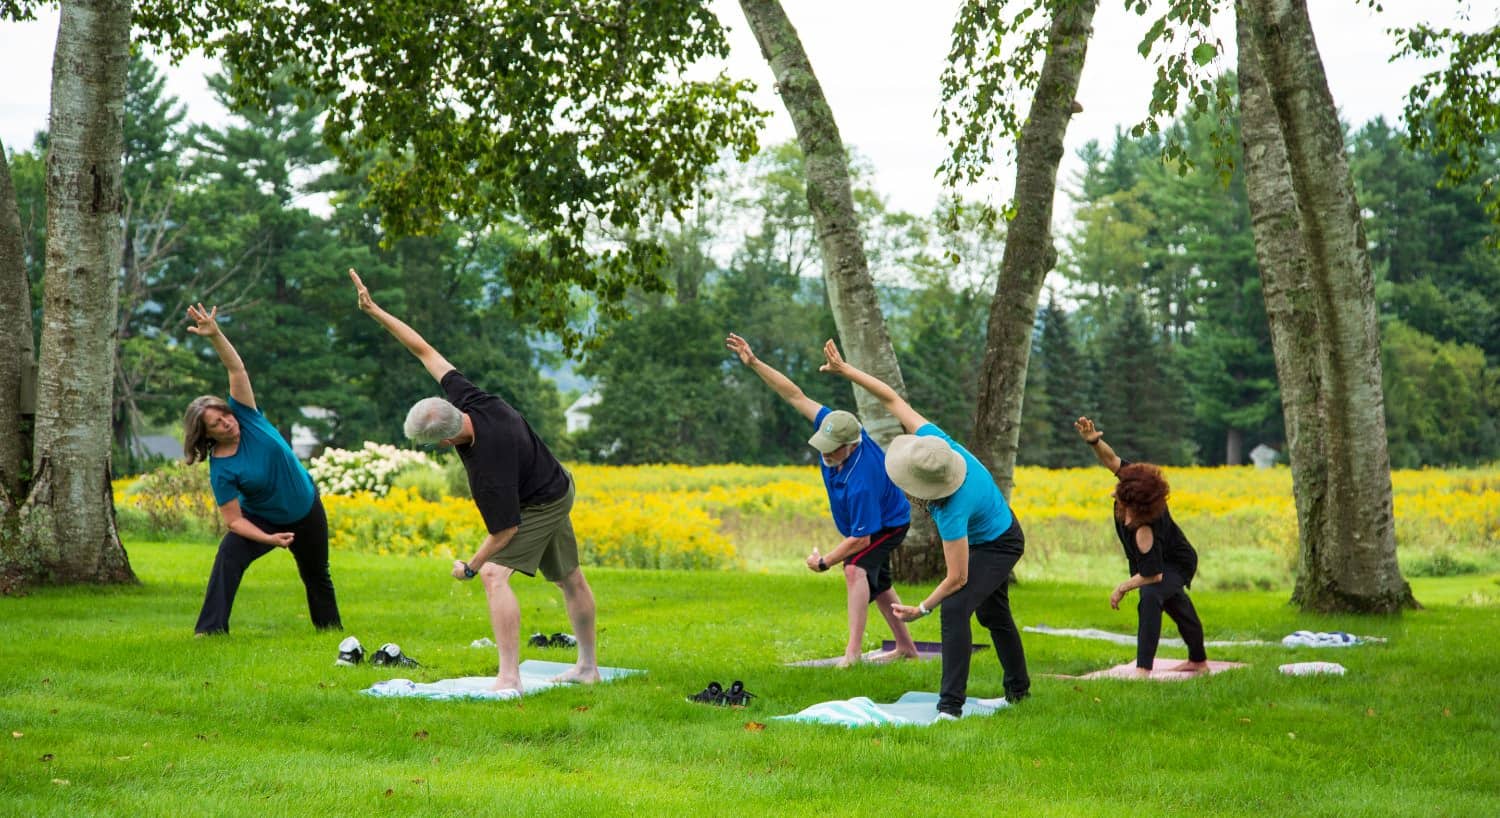 People doing yoga on green grass with trees in the background